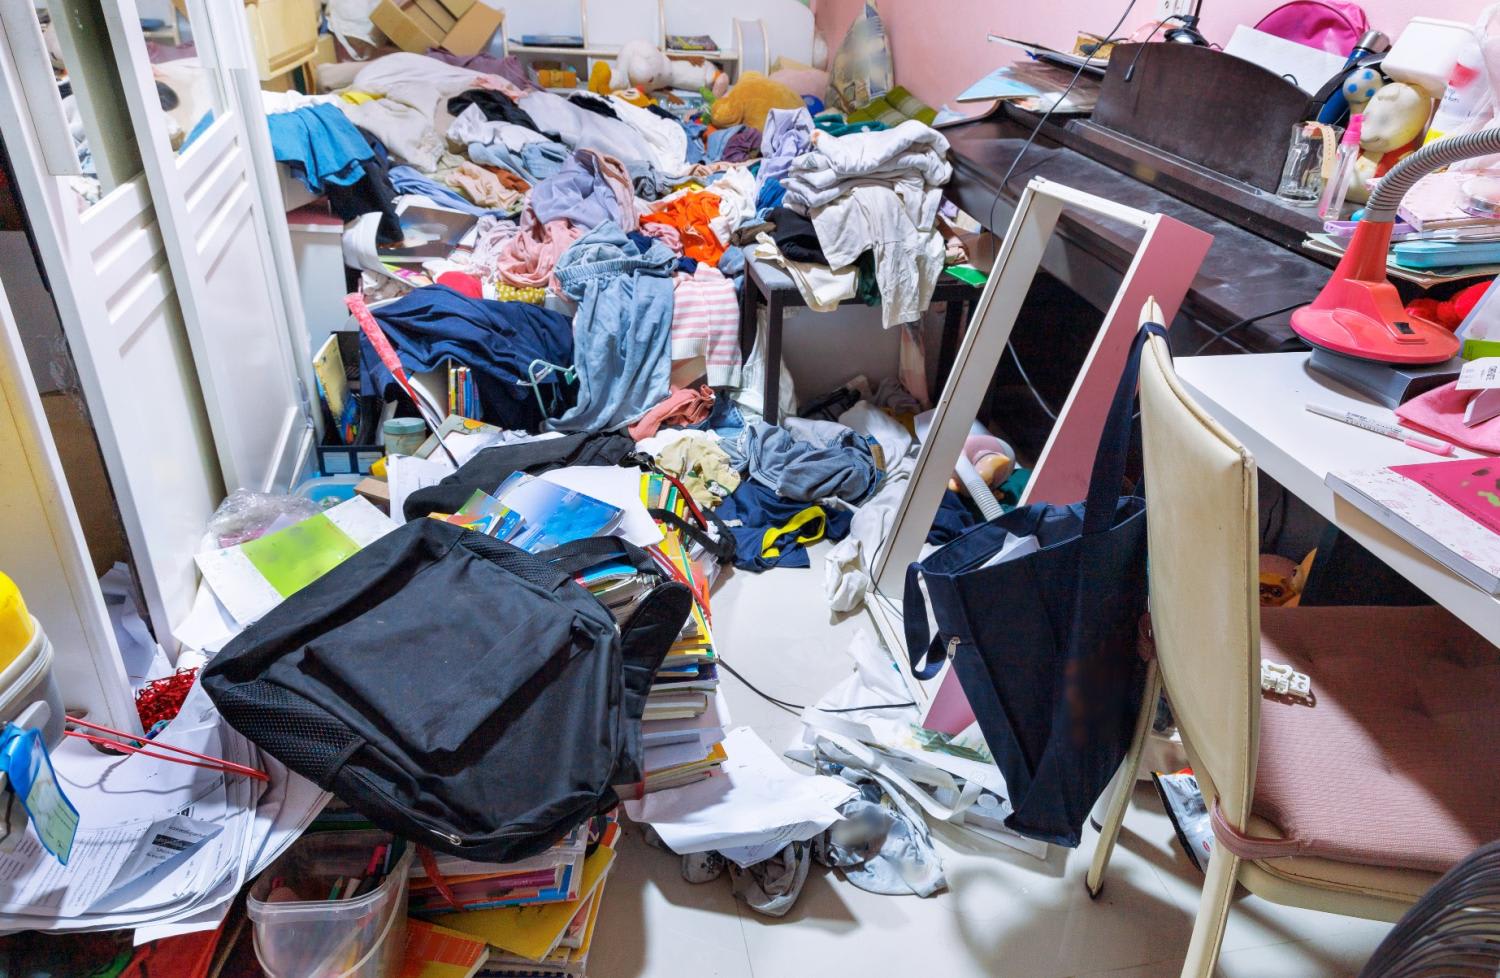 The Hoarding Management Core Group may refer hoarders to the Agency for Integrated Care and the Institute of Mental Health for professional assessment and treatment if they are suspected of having mental health conditions.